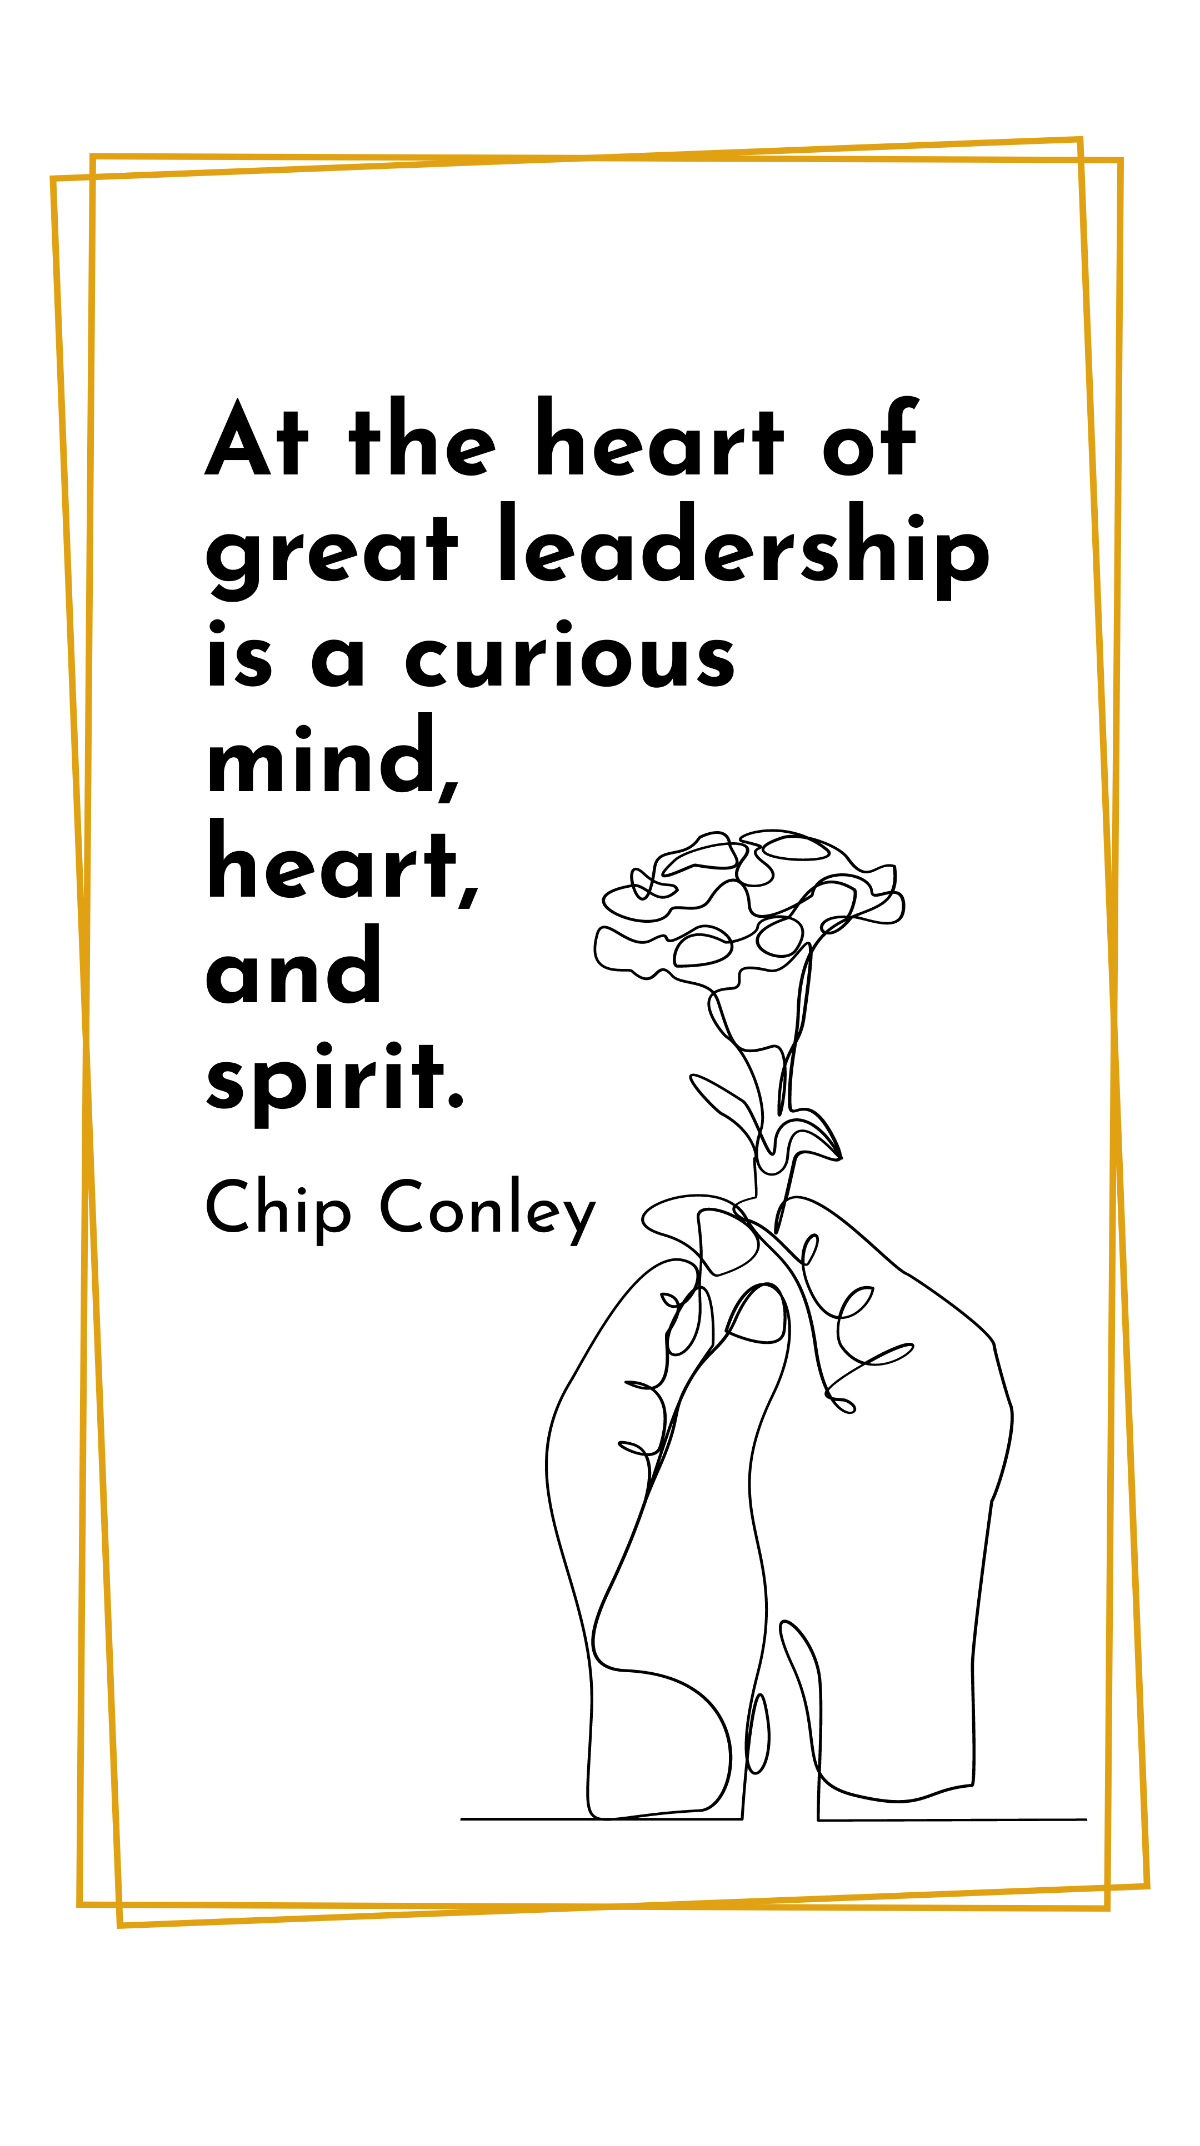 Chip Conley - At the heart of great leadership is a curious mind, heart, and spirit. Template